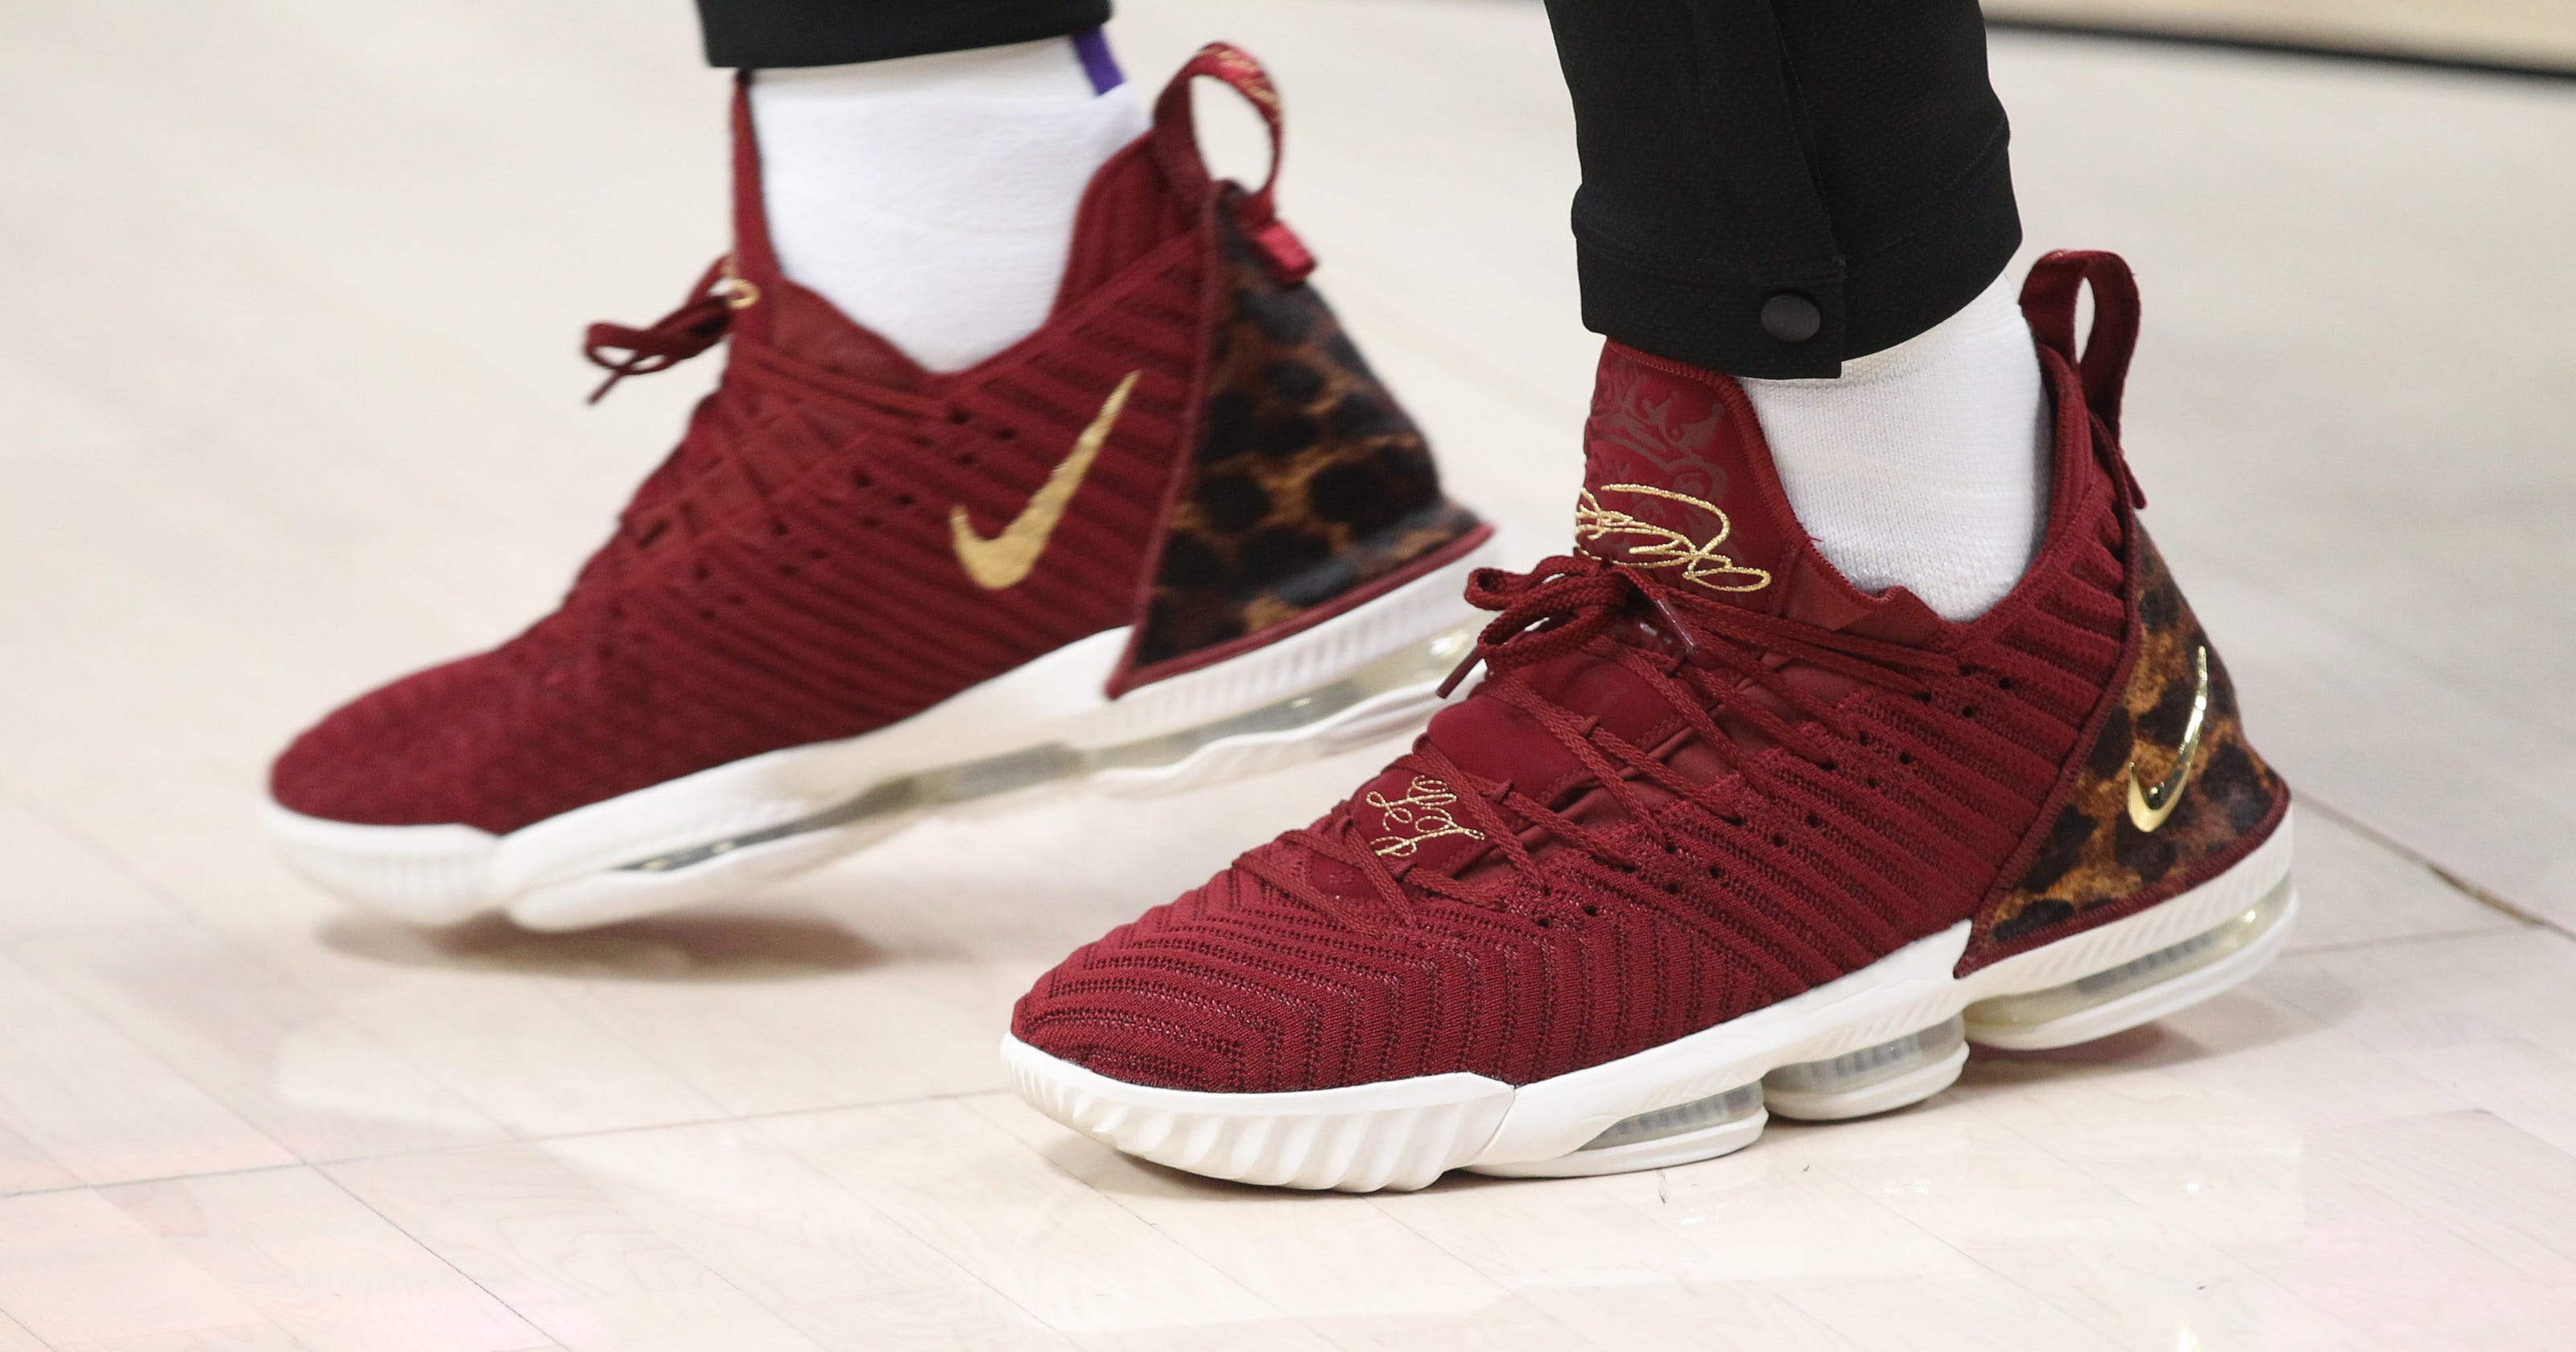 LeBron James: Gold and burgundy shoes not nod to former team